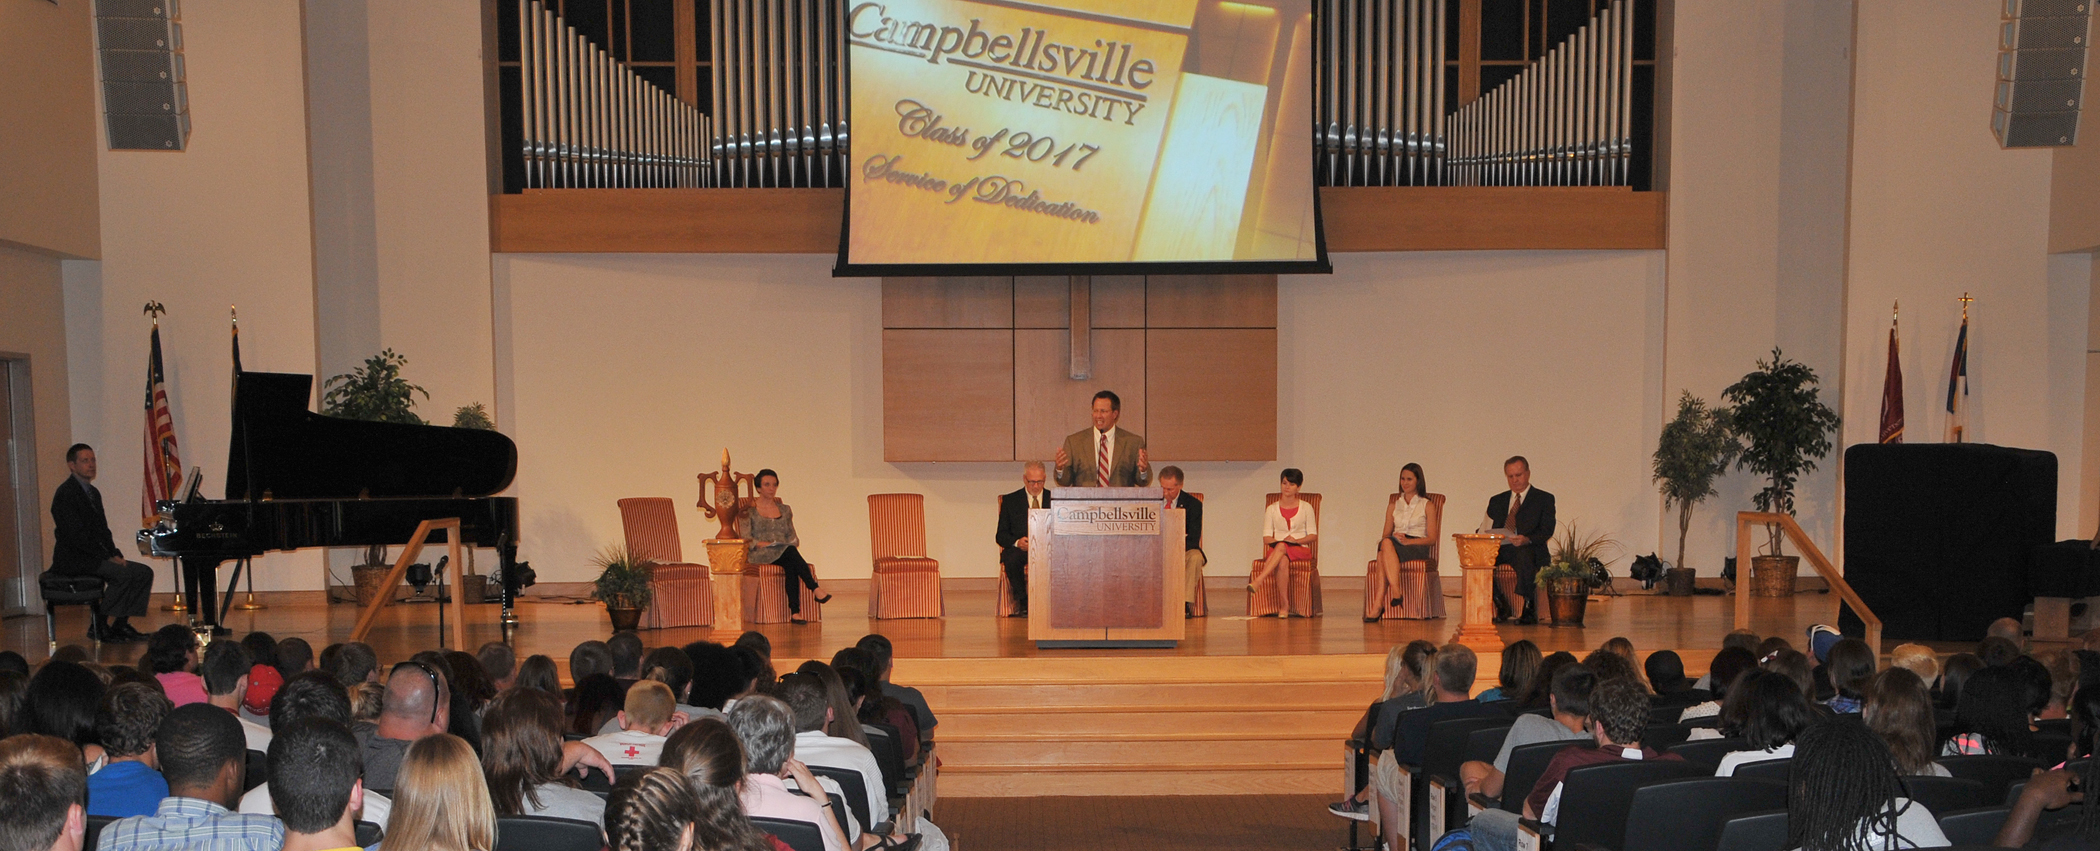 Jon Hansford, director of First Year Experience (FYE), at left, went over the agenda for Sunday night’s Service of Dedication with Kelsey Doss and Jacqueline Nelson.(Campbellsville University photo by Linda Waggener)